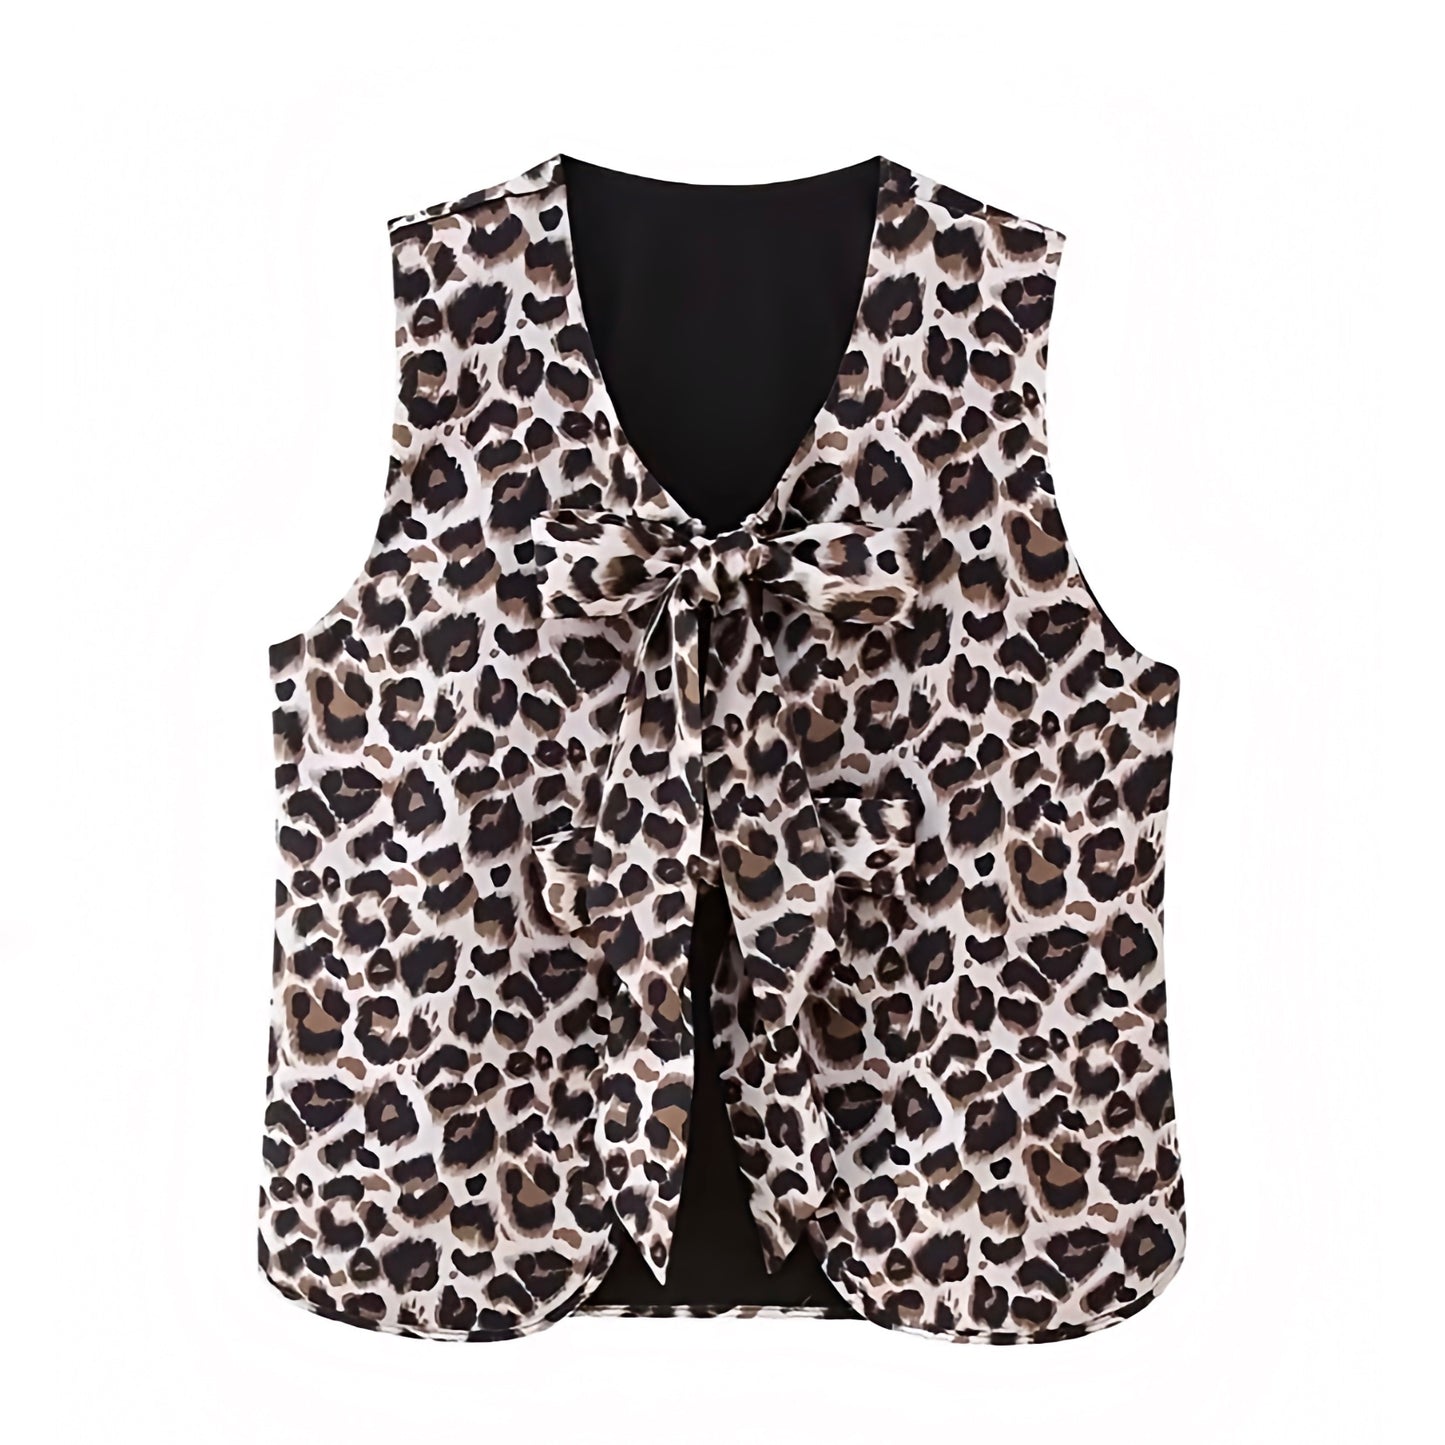 leopard-cheetah-animal-print-patterned-brown-black-white-bow-lace-up-sleeveless-v-neck-vest-crop-top-blouse-shirt-women-ladies-chic-trendy-spring-2024-summer-elegant-casual-feminine-party-date-night-out-sexy-club-wear-y2k-style-zara-revolve-aritzia-white-fox-princess-polly-babyboo-iamgia-edikted